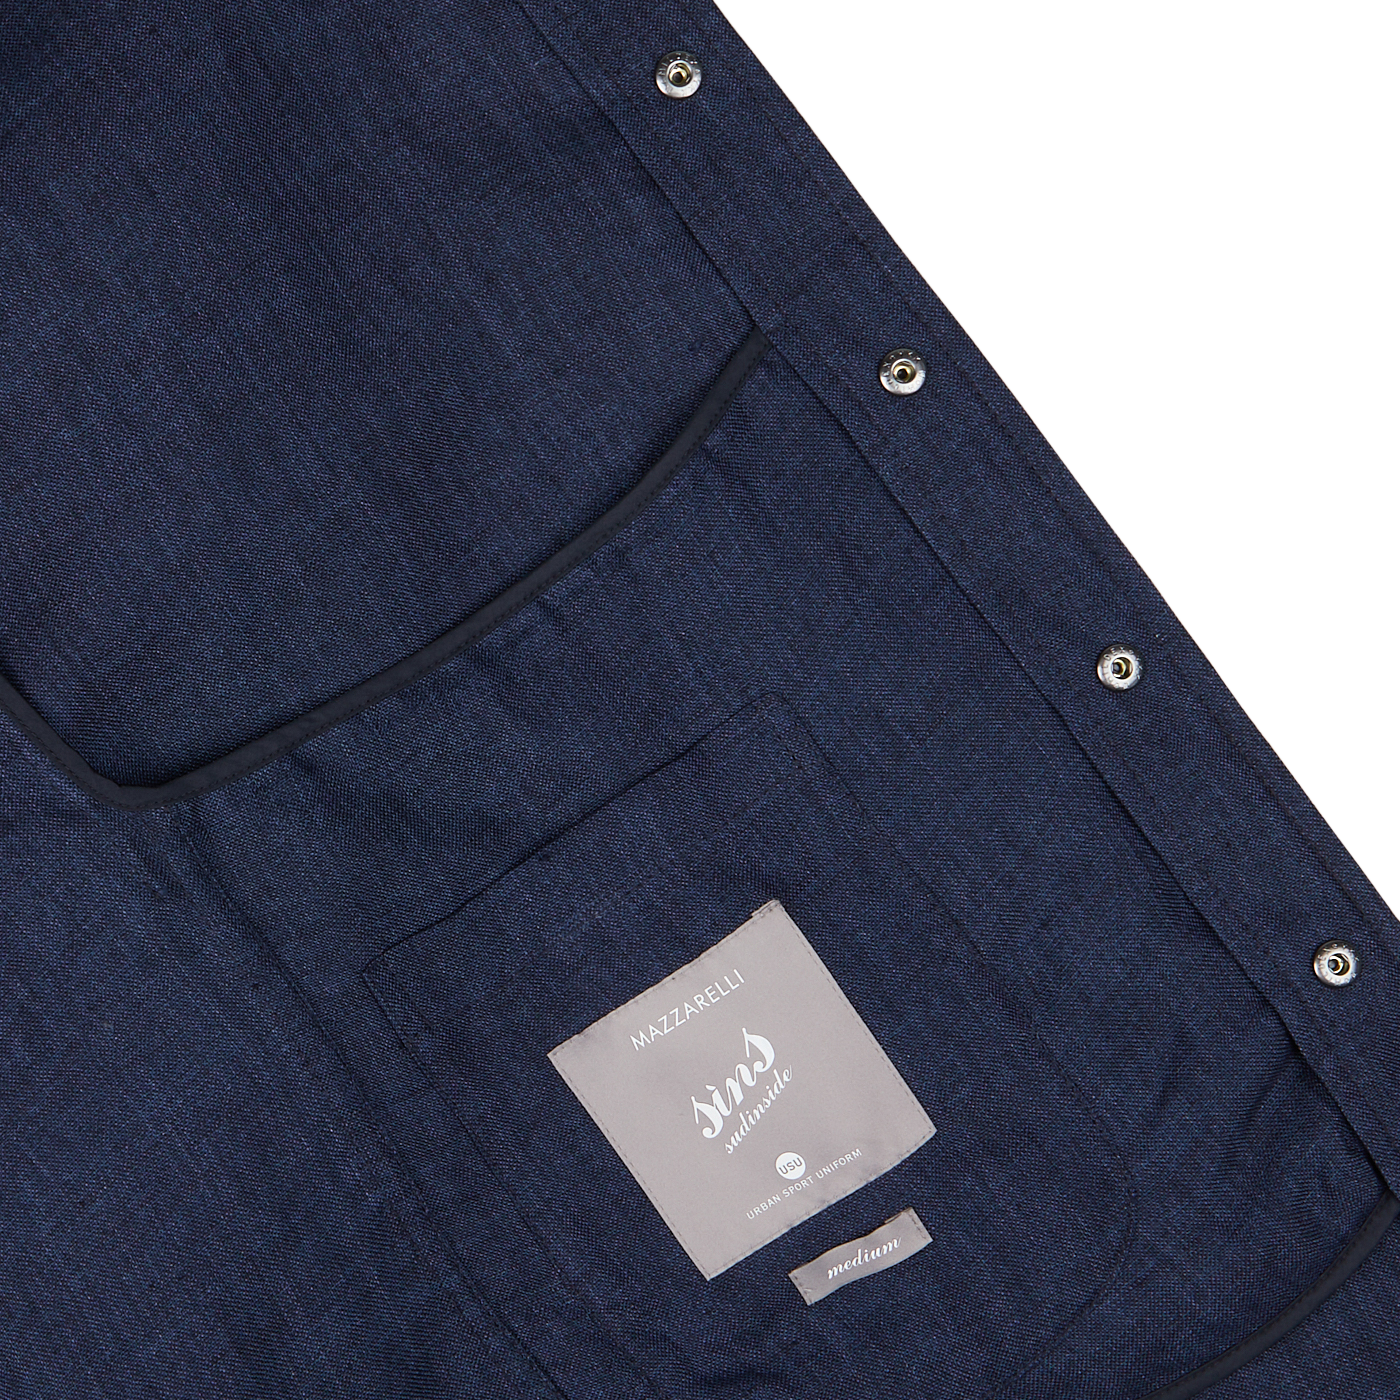 Close-up of a Mazzarelli dark blue organic linen overshirt detail showing a pocket and a label.